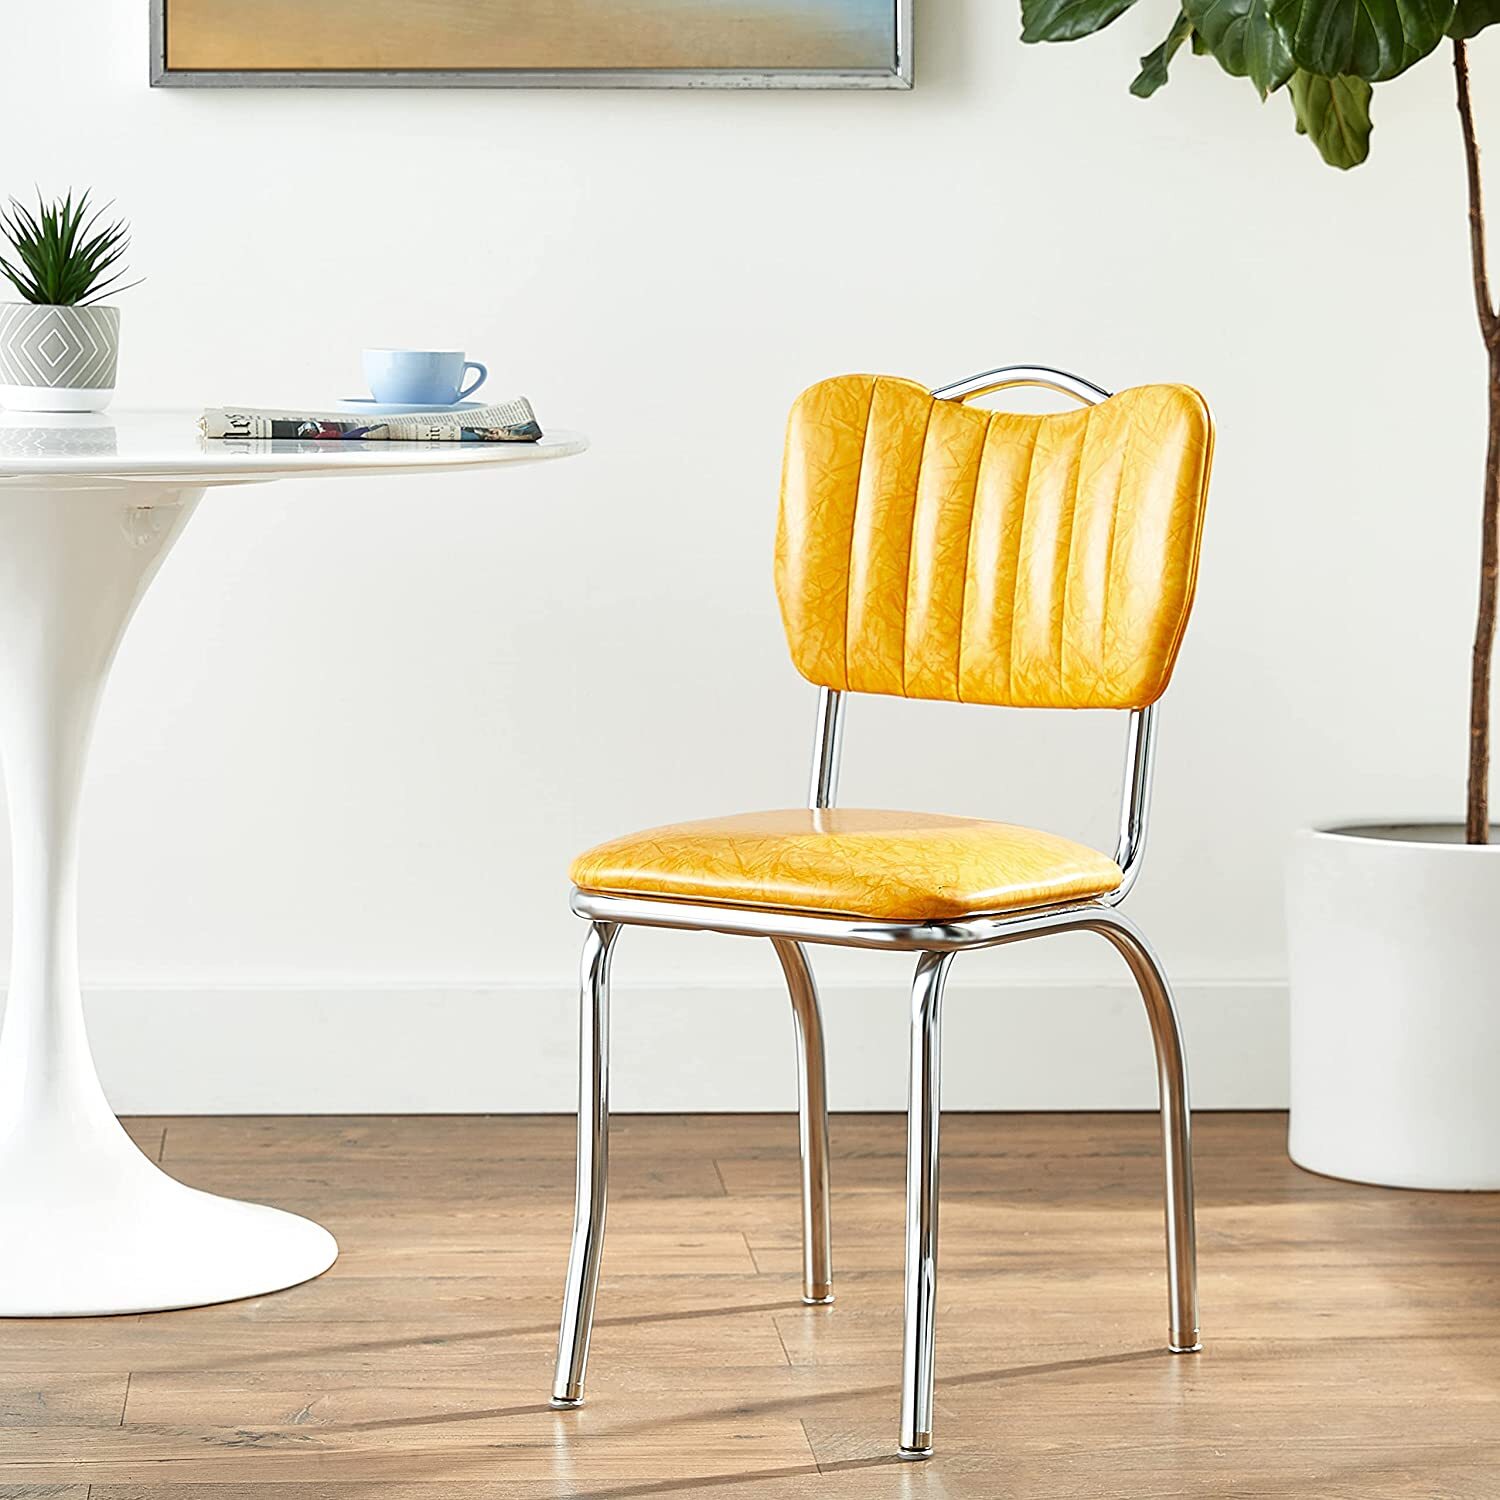 Retro kitchen chairs with cracked ice yellow leather 